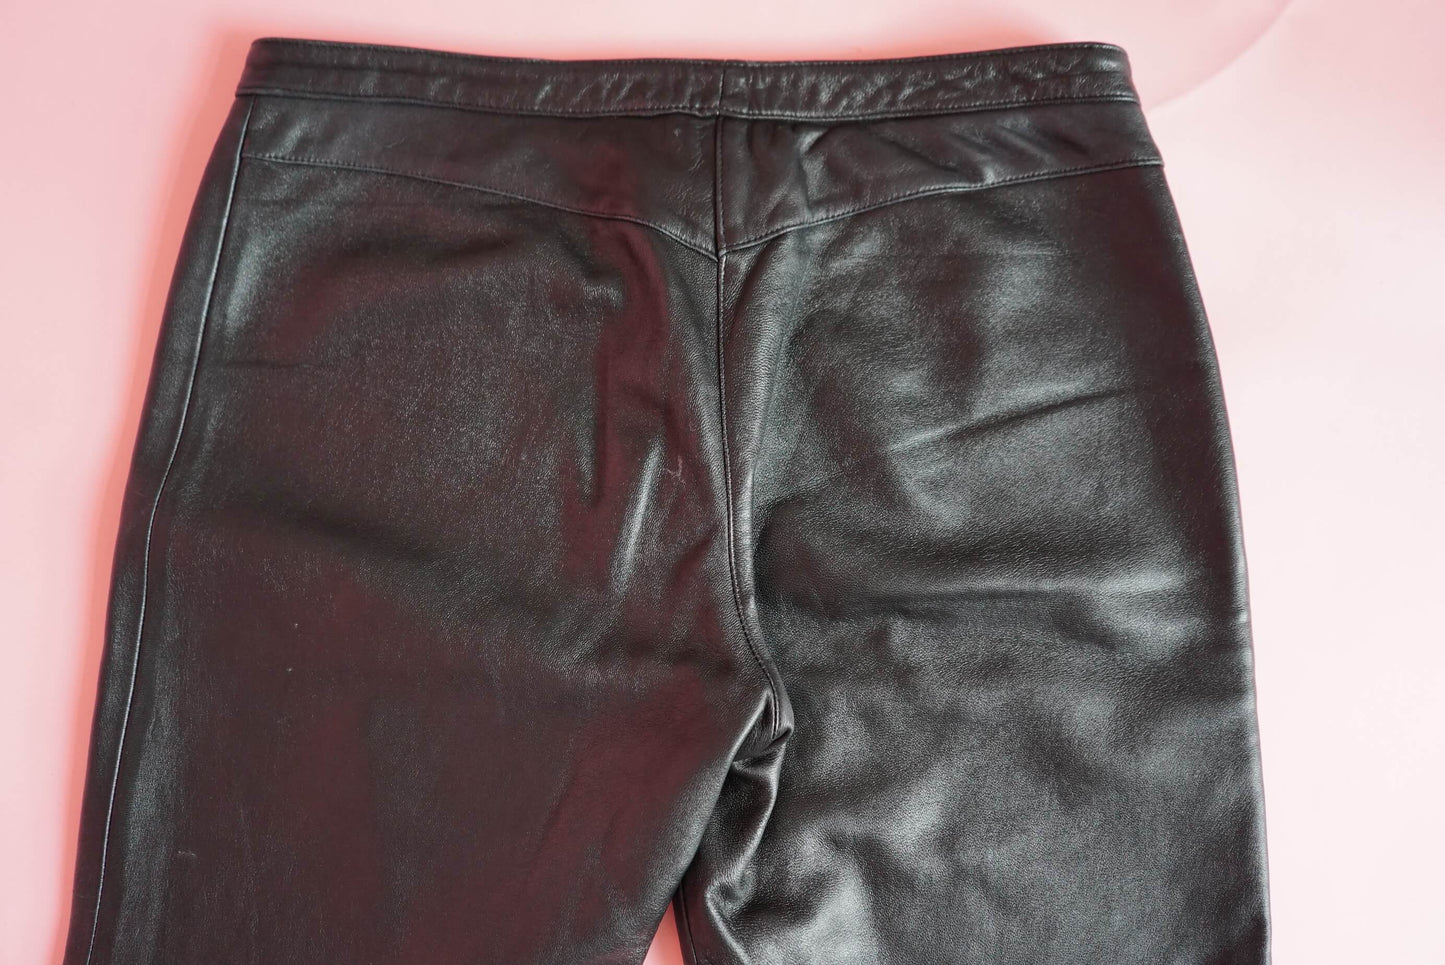 Vintage Black Soft Leather Trousers Size 14